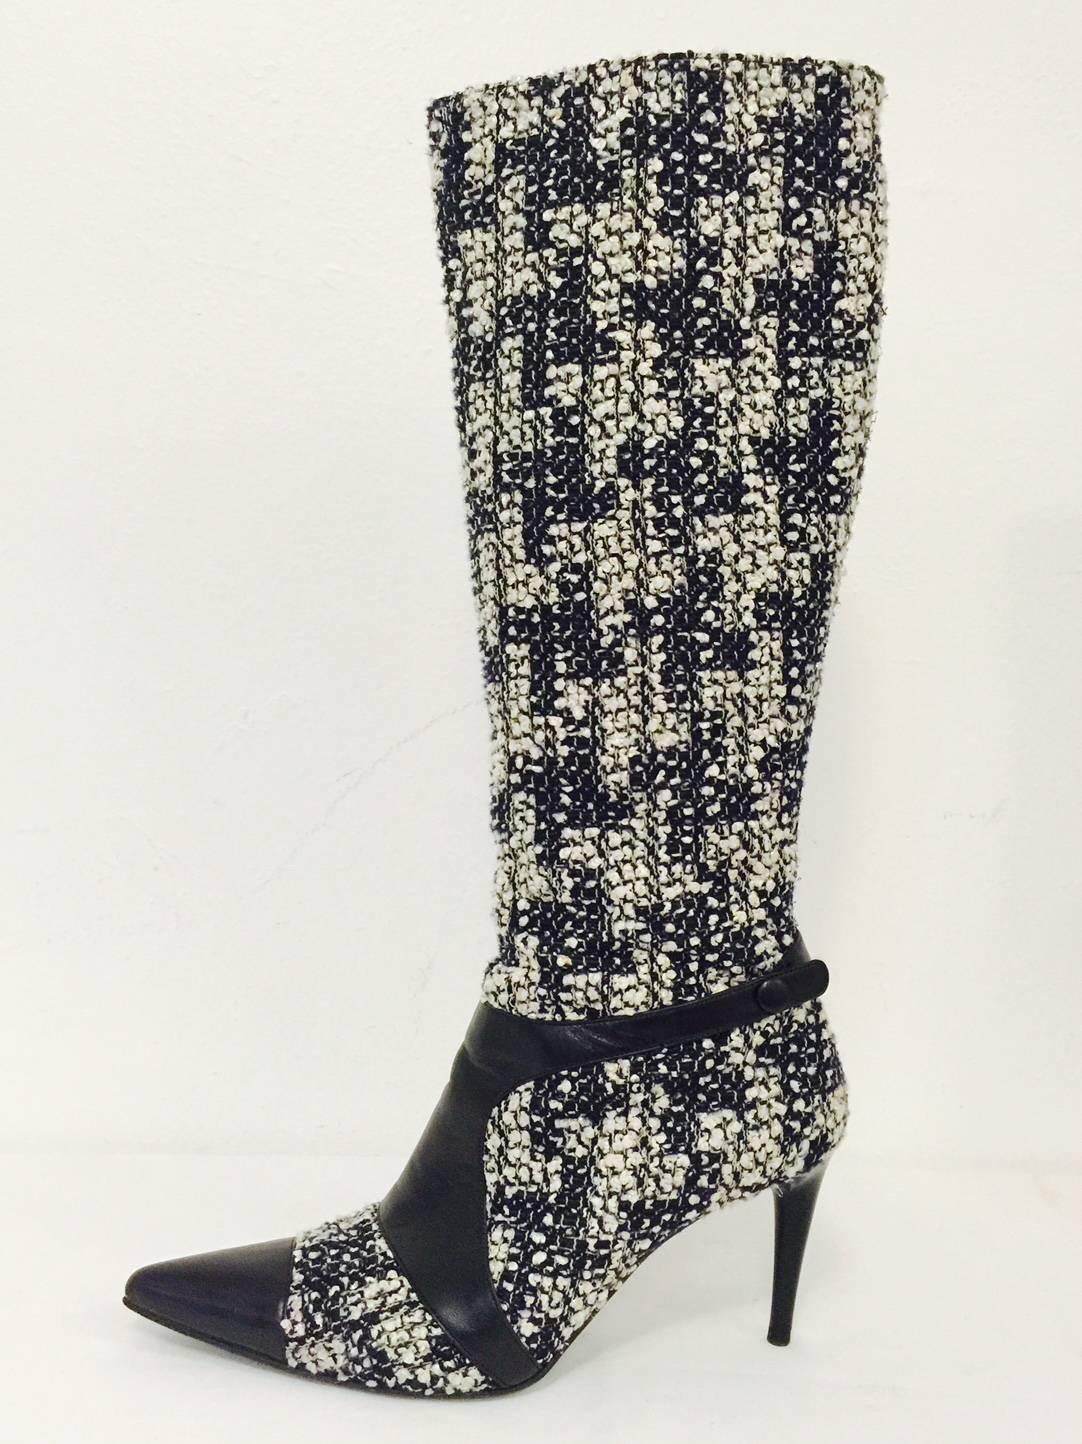 One needs to see these Black and White Tweed High Heel Tall Boots to believe them!   Features include pointed cap toes, leather, ankle straps and 3.5